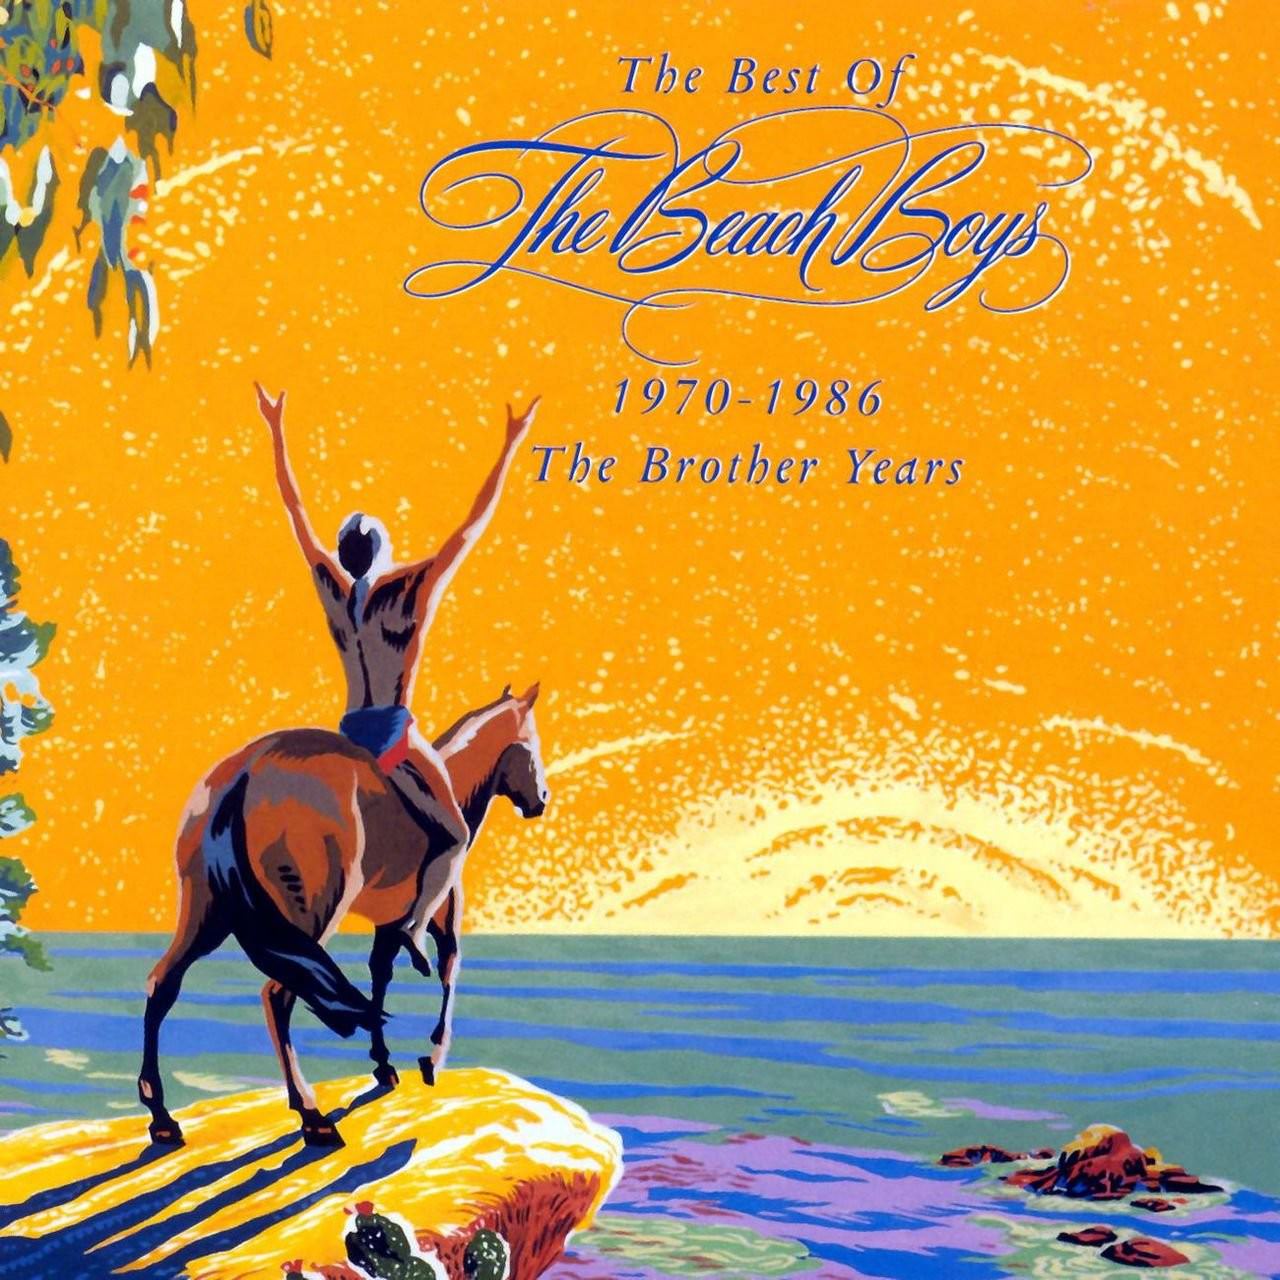 The Best Of The Beach Boys 1970-1986 - The Brother Years cover